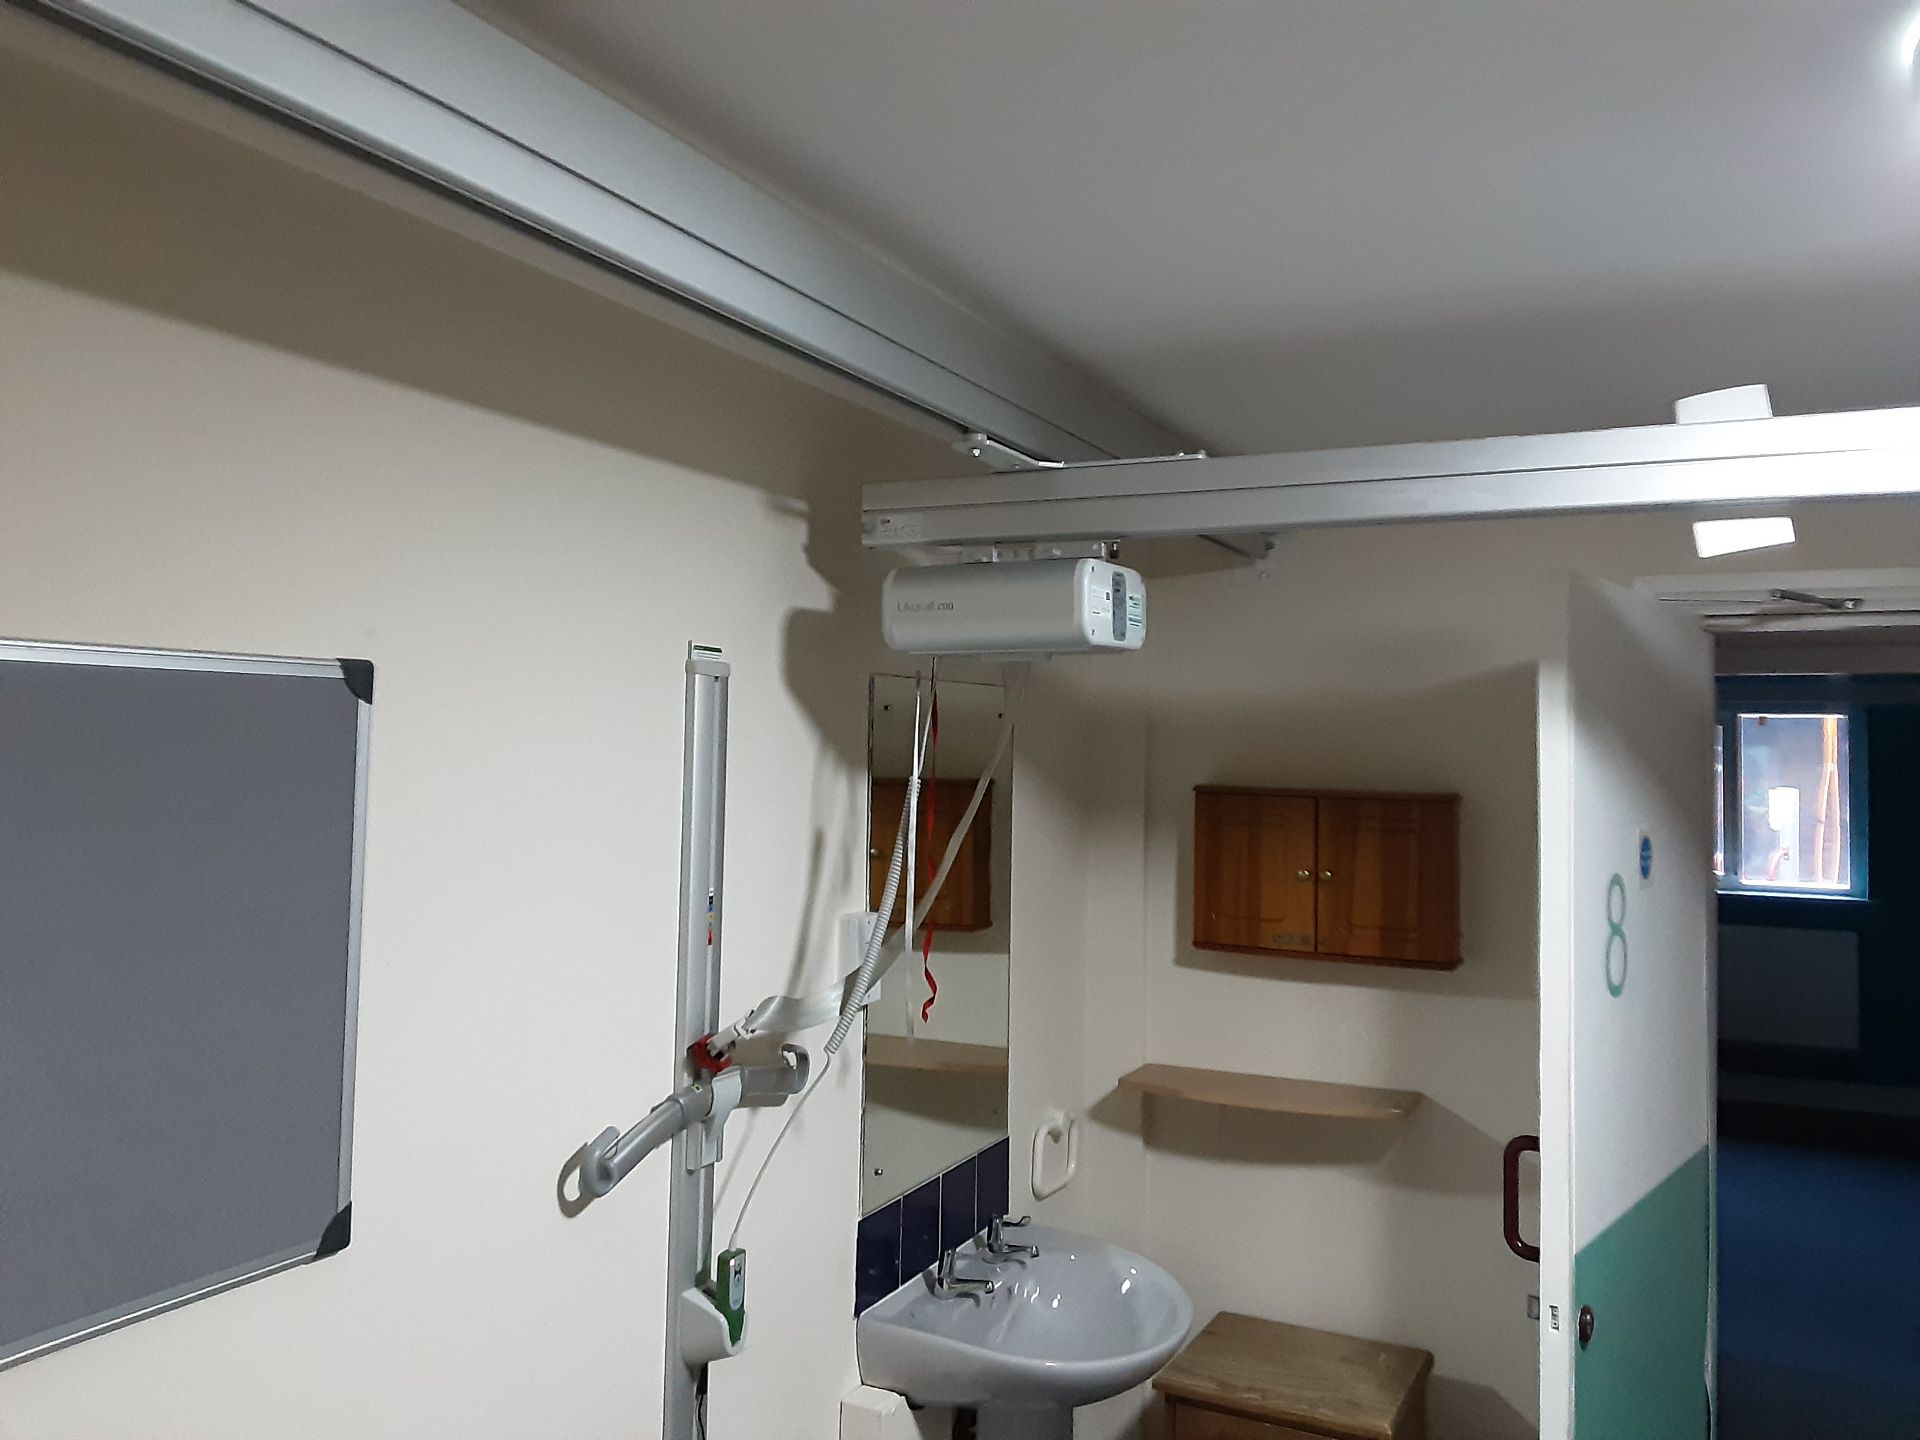 Likorall 200kg Patient Lift with KwikTrak Ceiling Rail System Serial No: 8707849